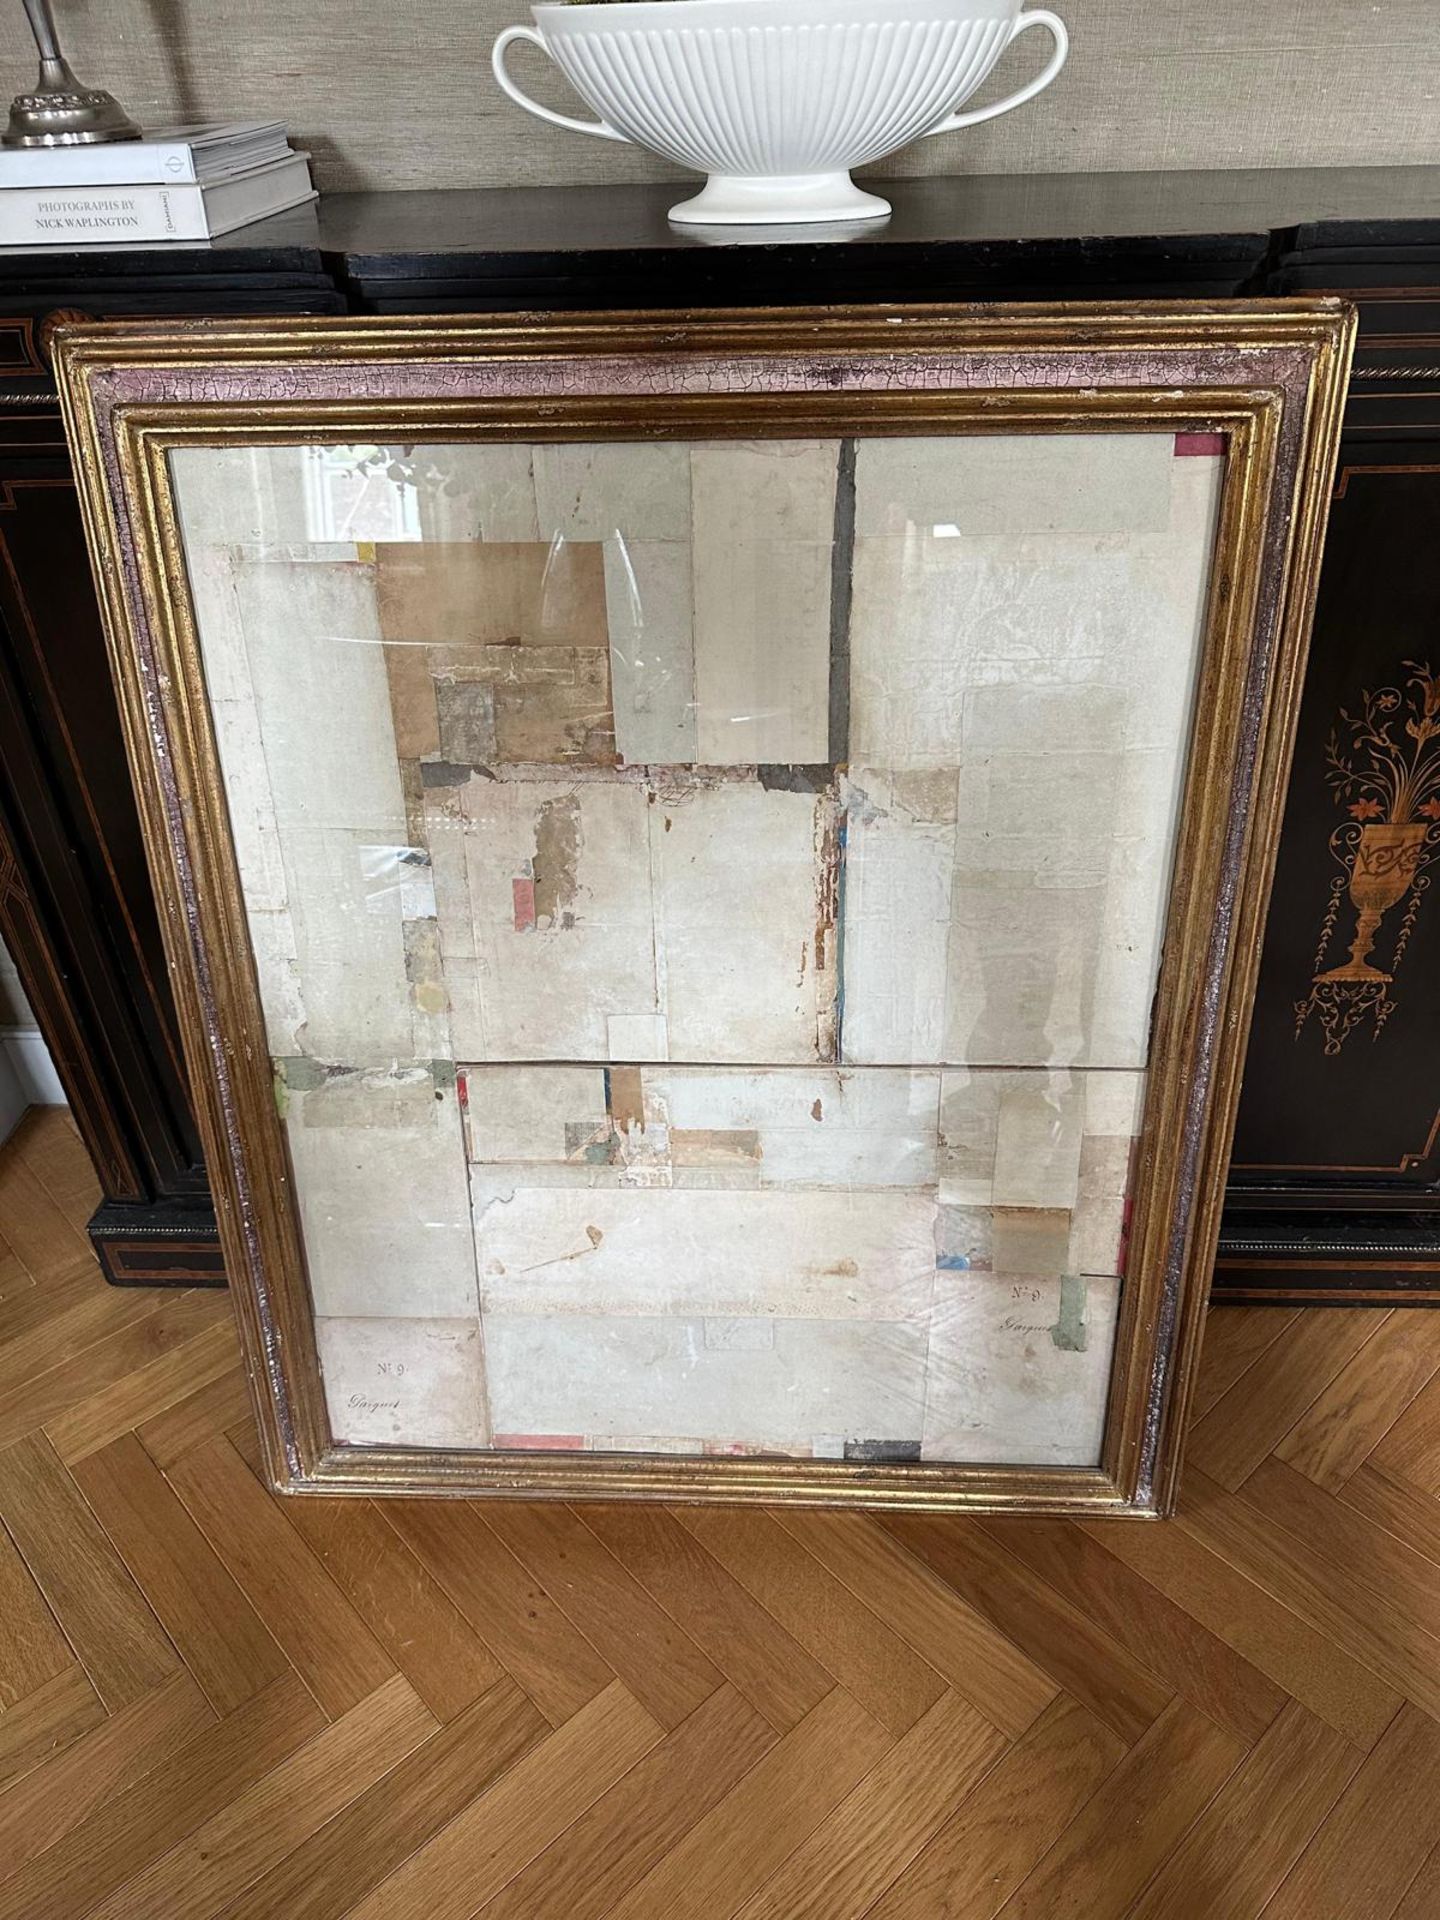 Huw Griffith Artwork titled No,9 Parquet, signed and framed 100 x 84cm (Apt 1) Huw Griffith